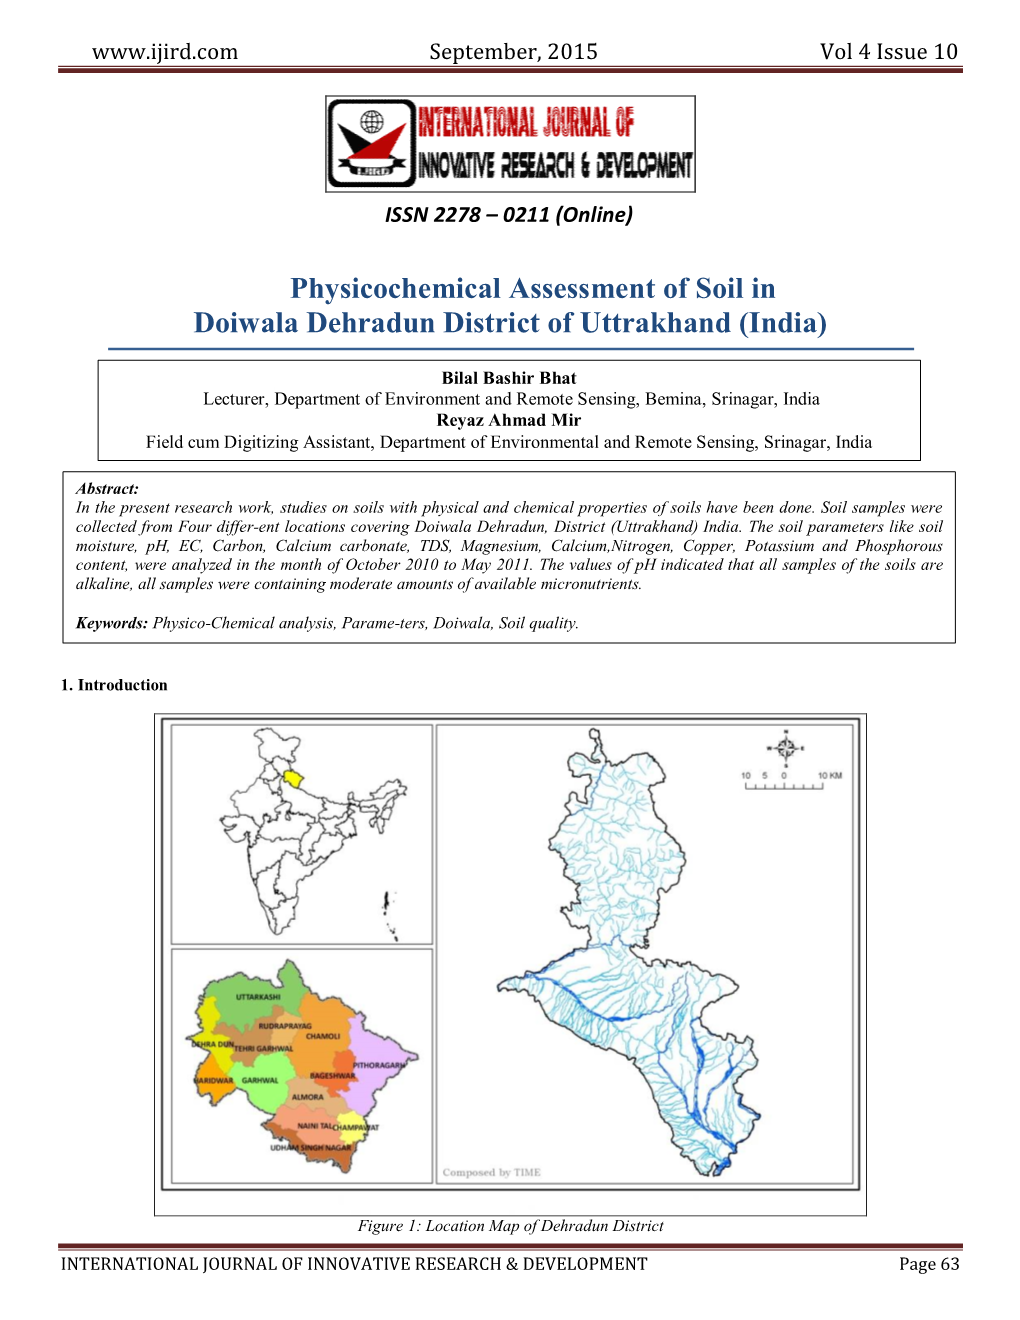 Physicochemical Assessment of Soil in Doiwala Dehradun District of Uttrakhand (India)